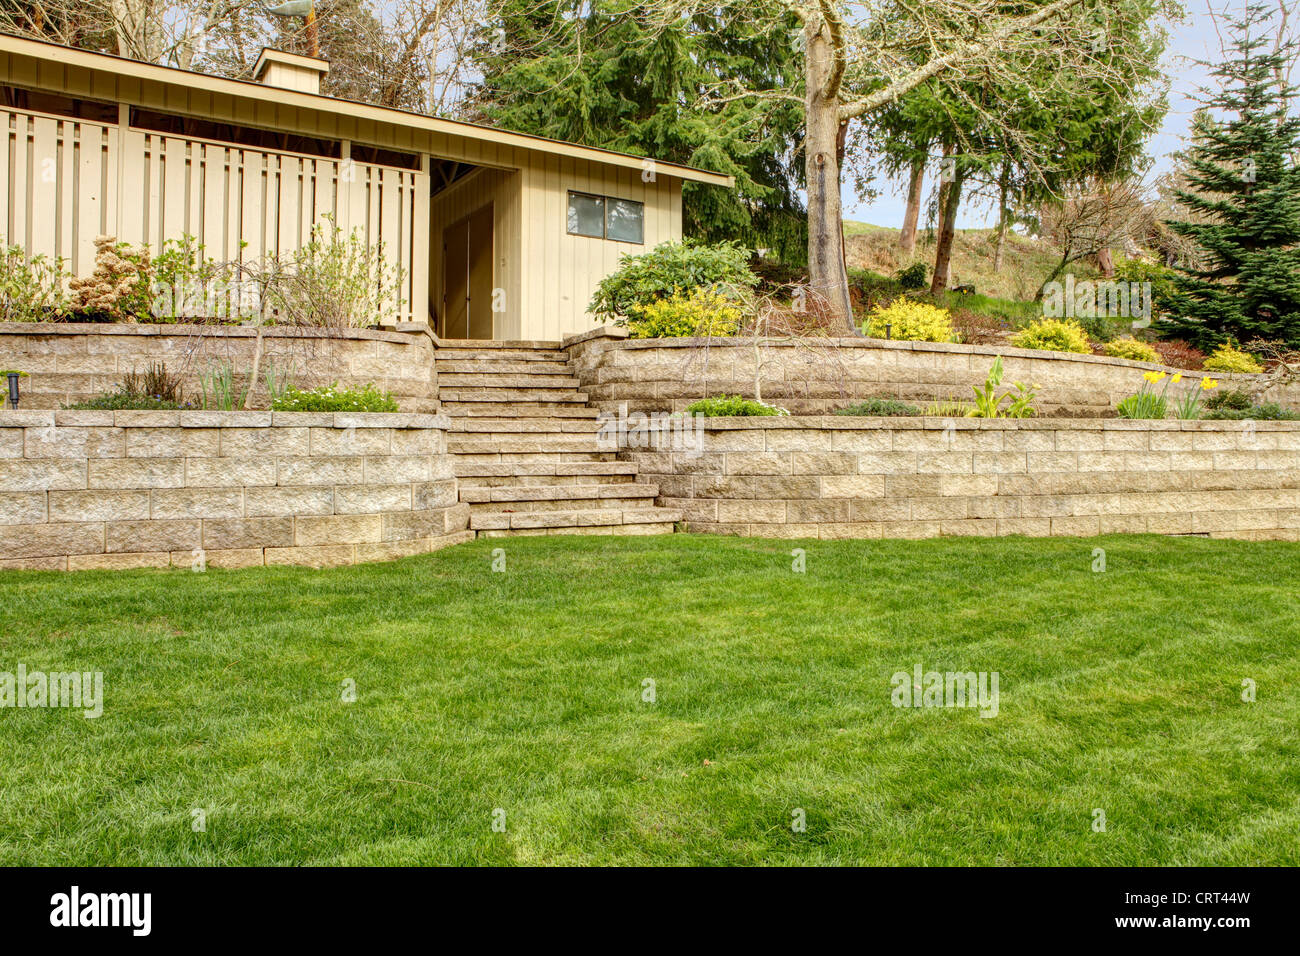 Retaining brick wall with garage building and spring landscape. Stock Photo